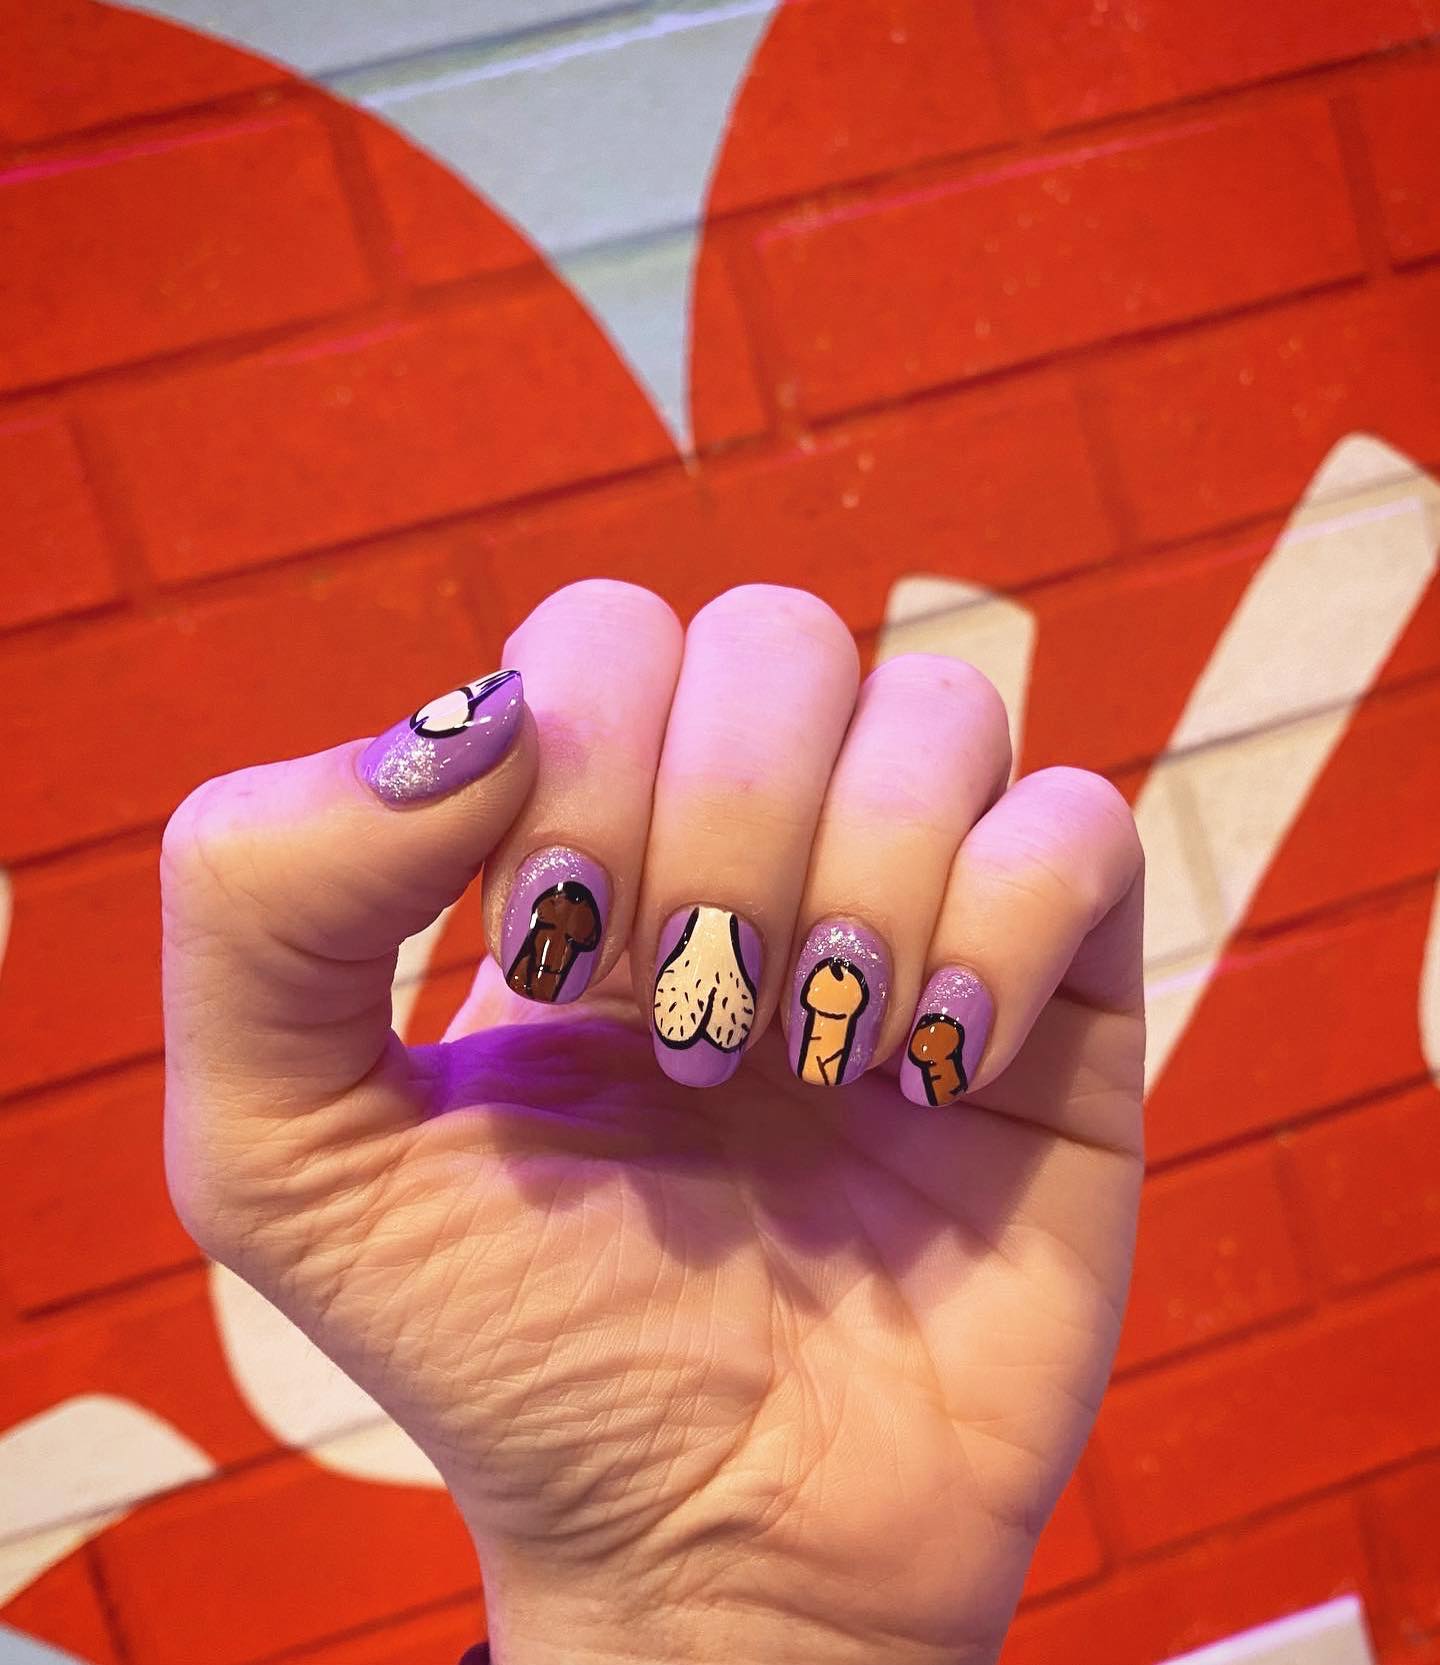 Inappropriate nails! If you want to wear a penis nail art that shows different colors of penis, then go for it.